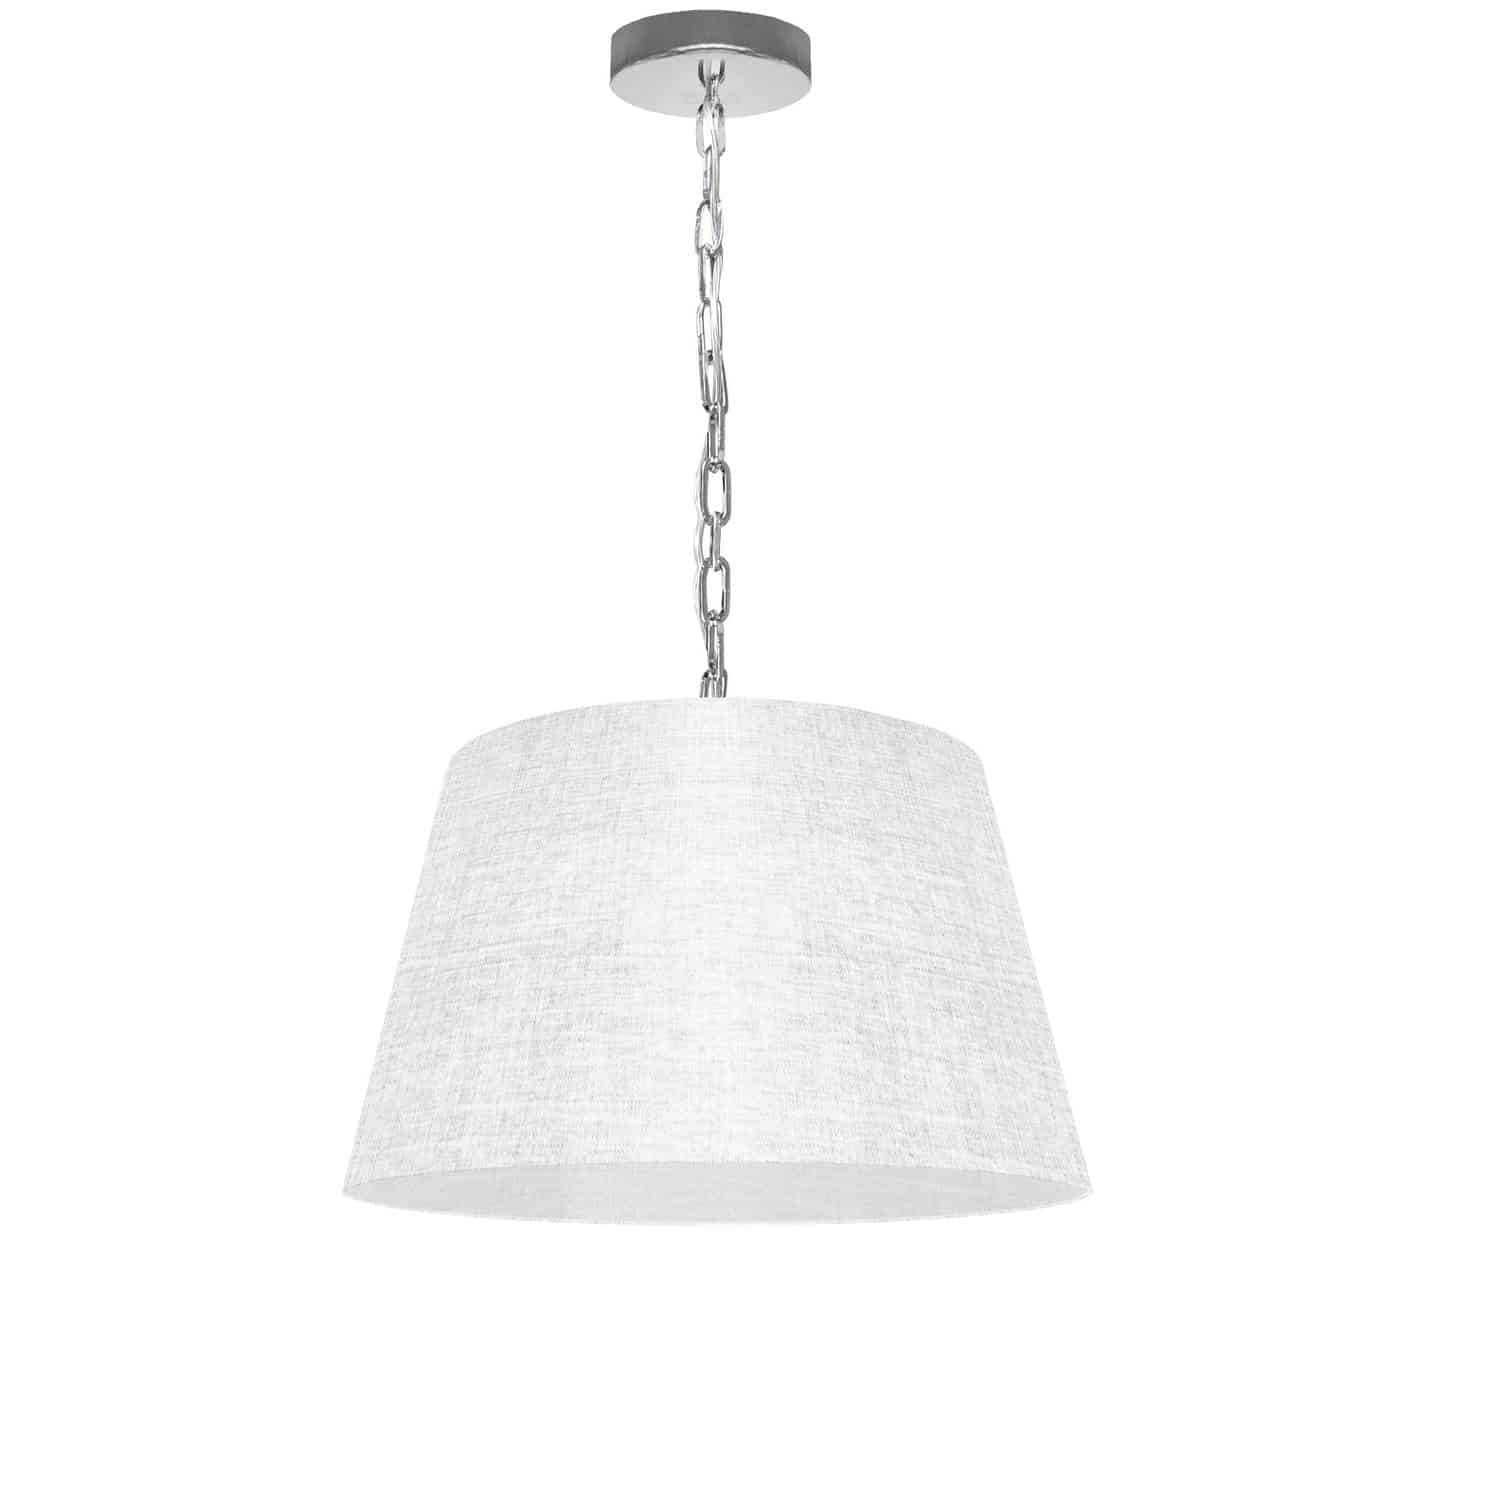 1 Light Brynn Small Pendant, White/Clear Shade, Polished Chrome